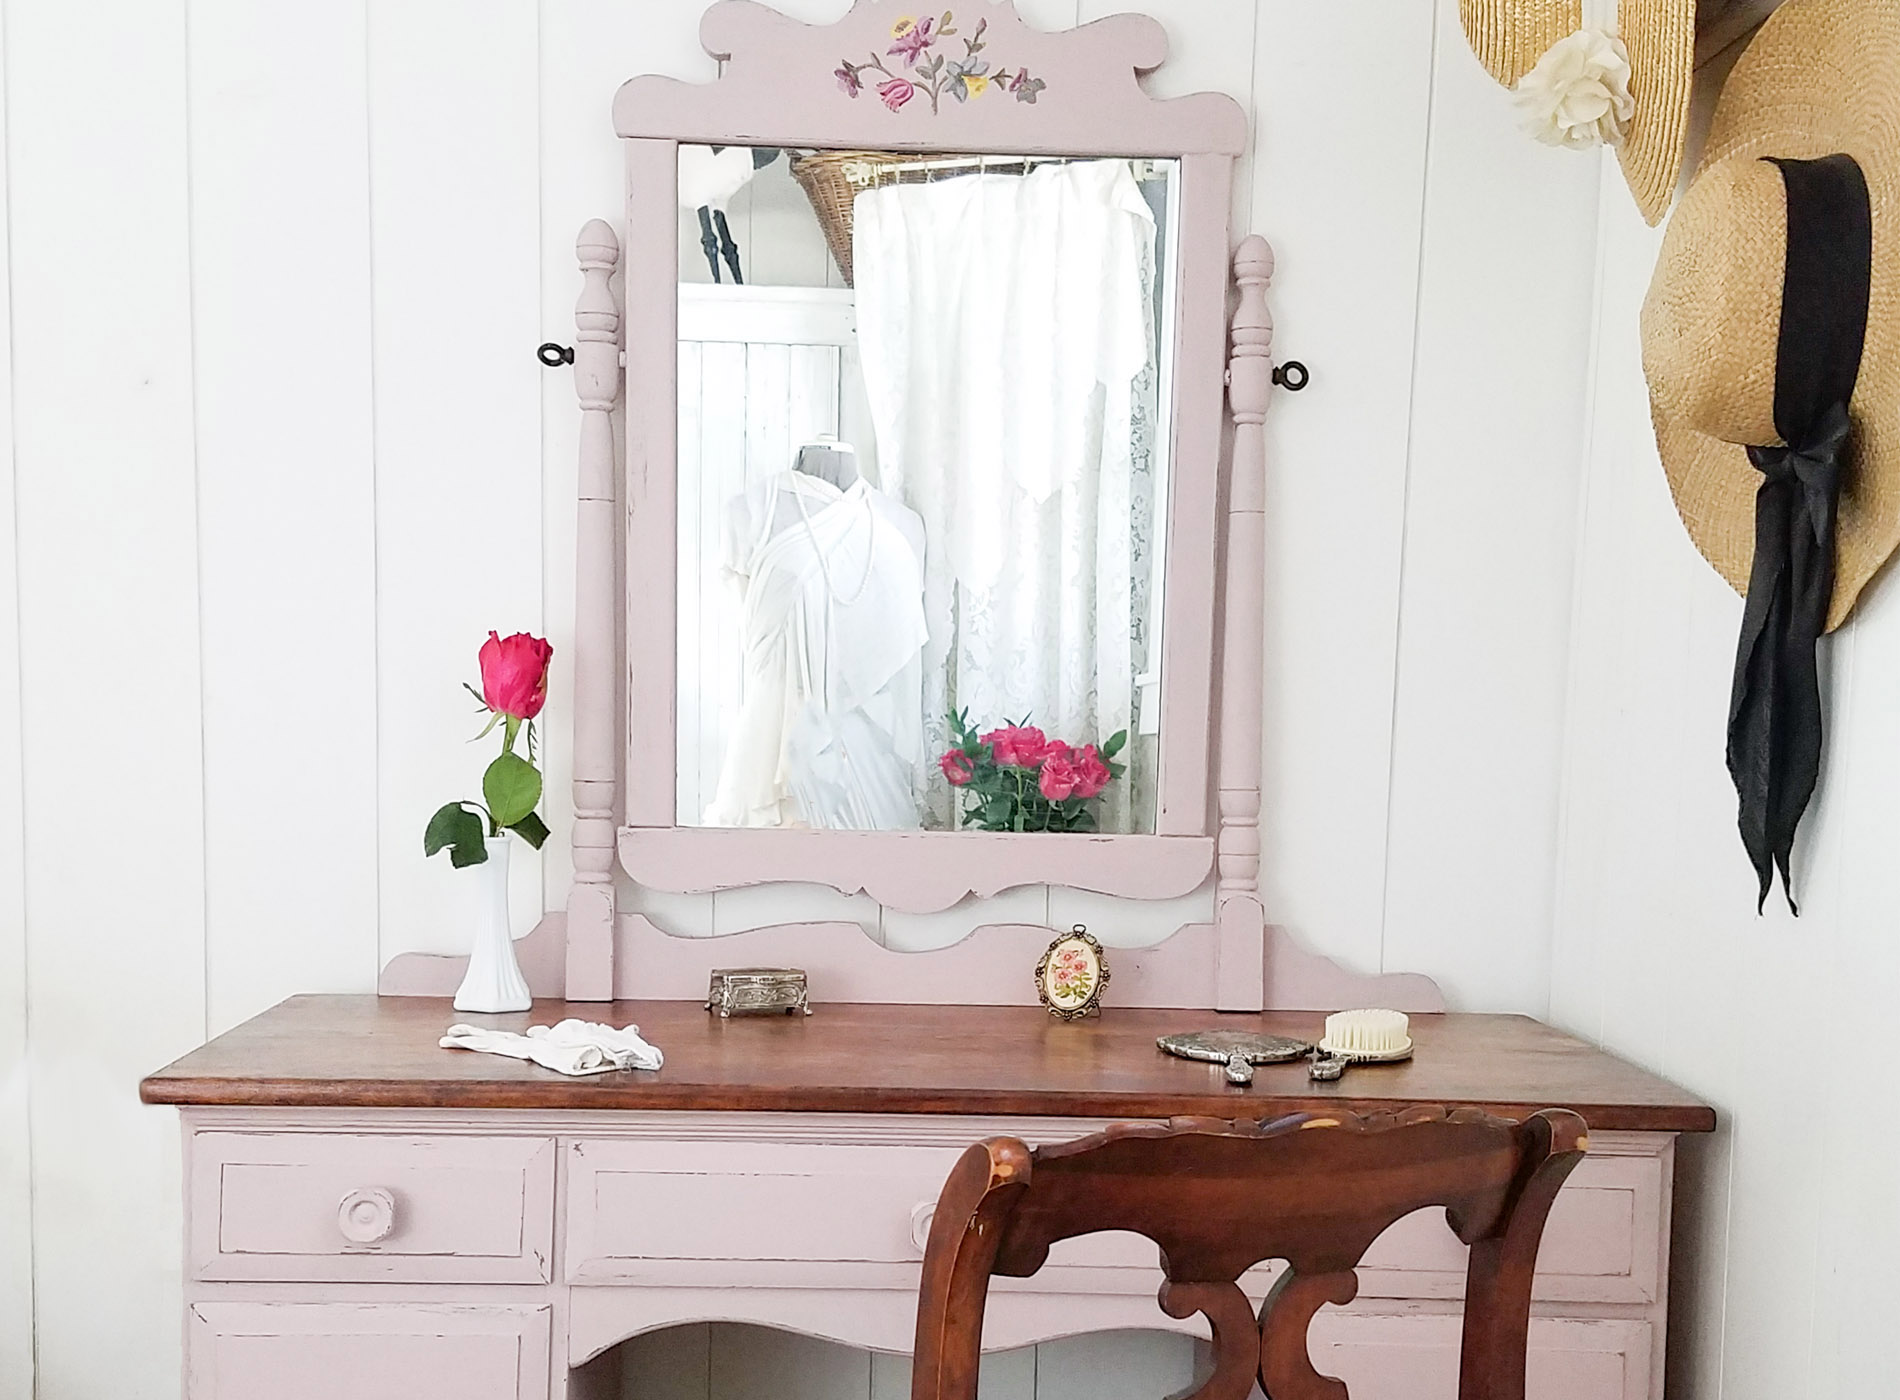 Featured Vintage Vanity Painted Tea Rose Pink by Prodigal Pieces | prodigalpieces.com